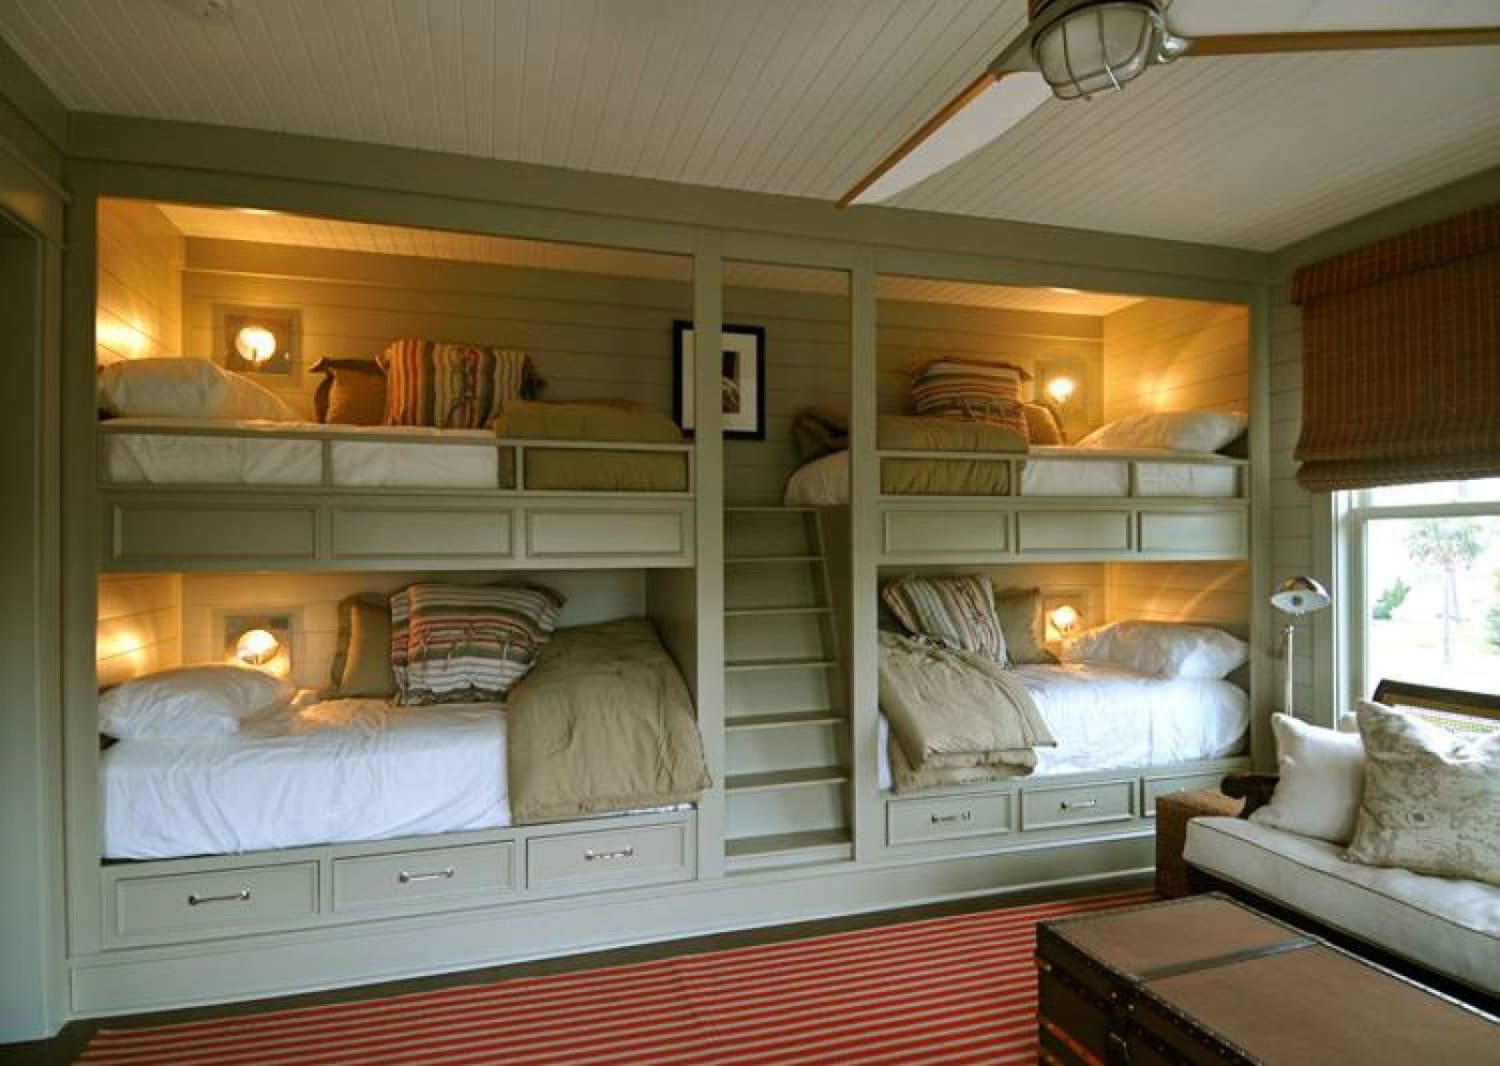 This Bunk Bed Room